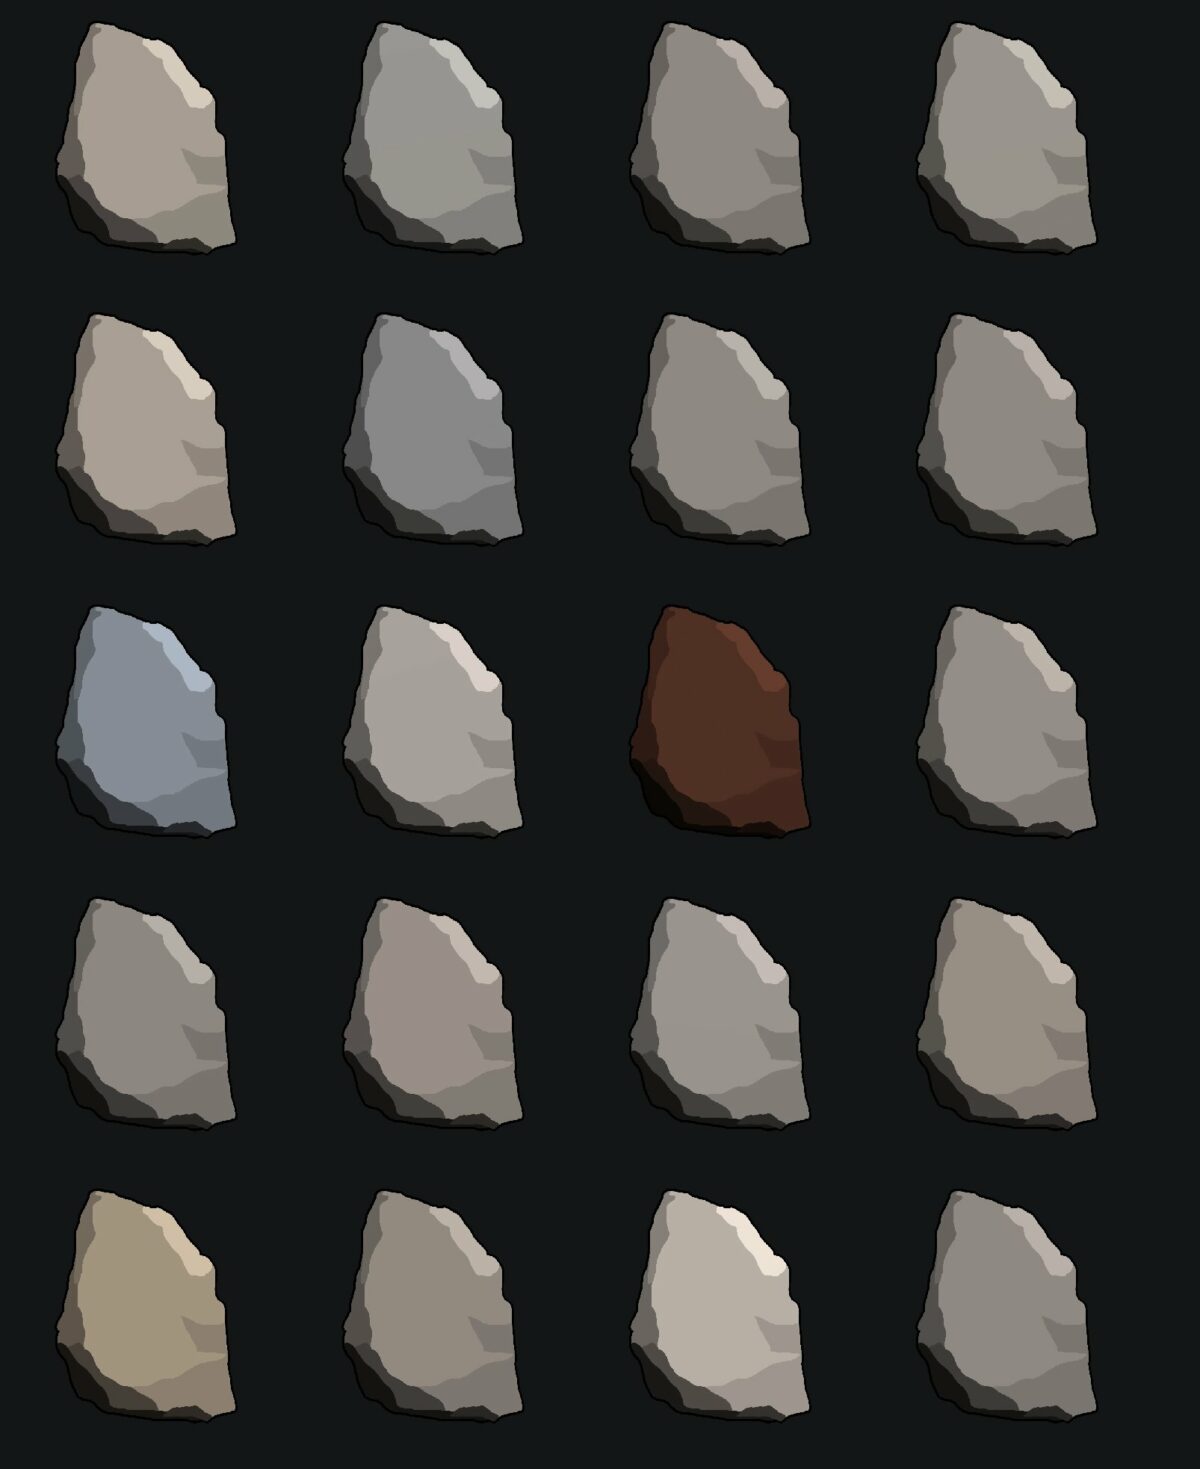 Rocks in different shades of grey and brown